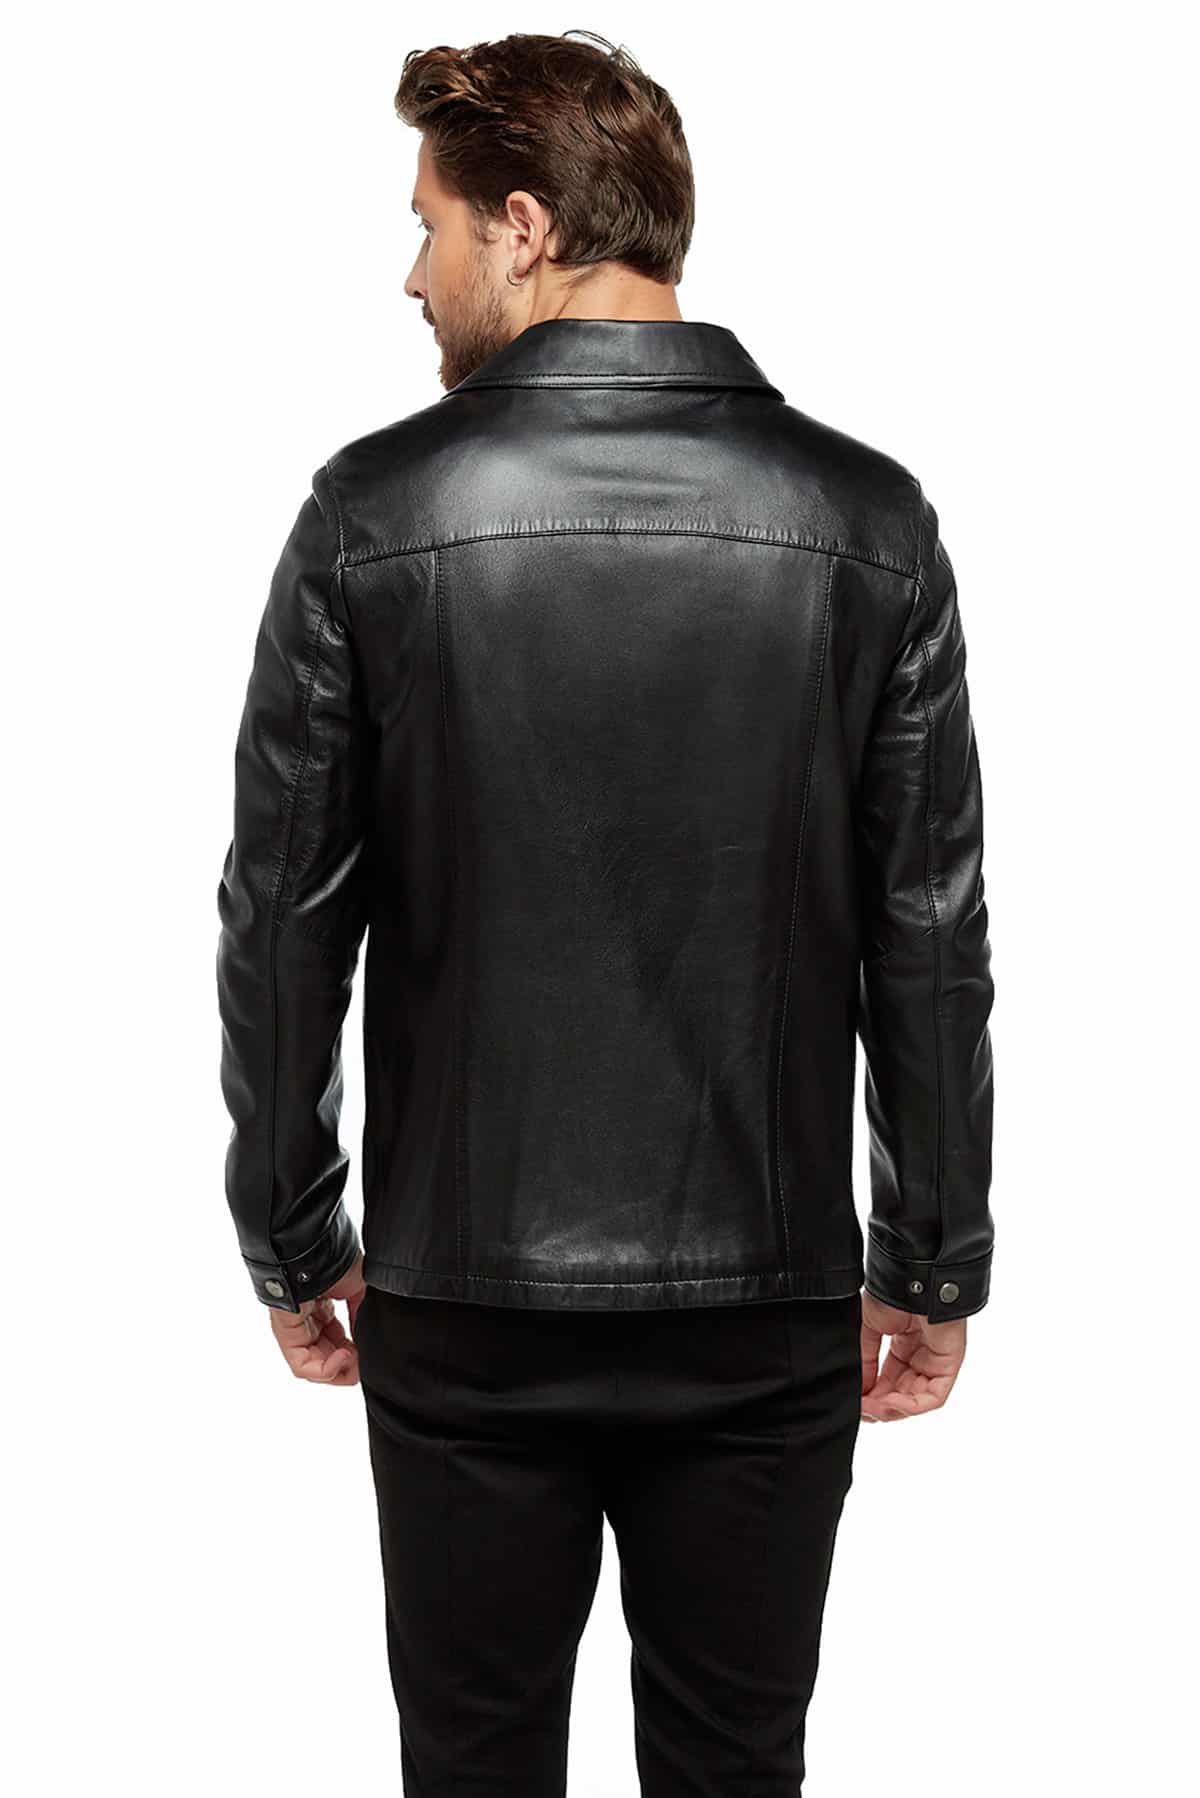 Serene Men's 100 % Real Black Leather Classic Casual Jacket